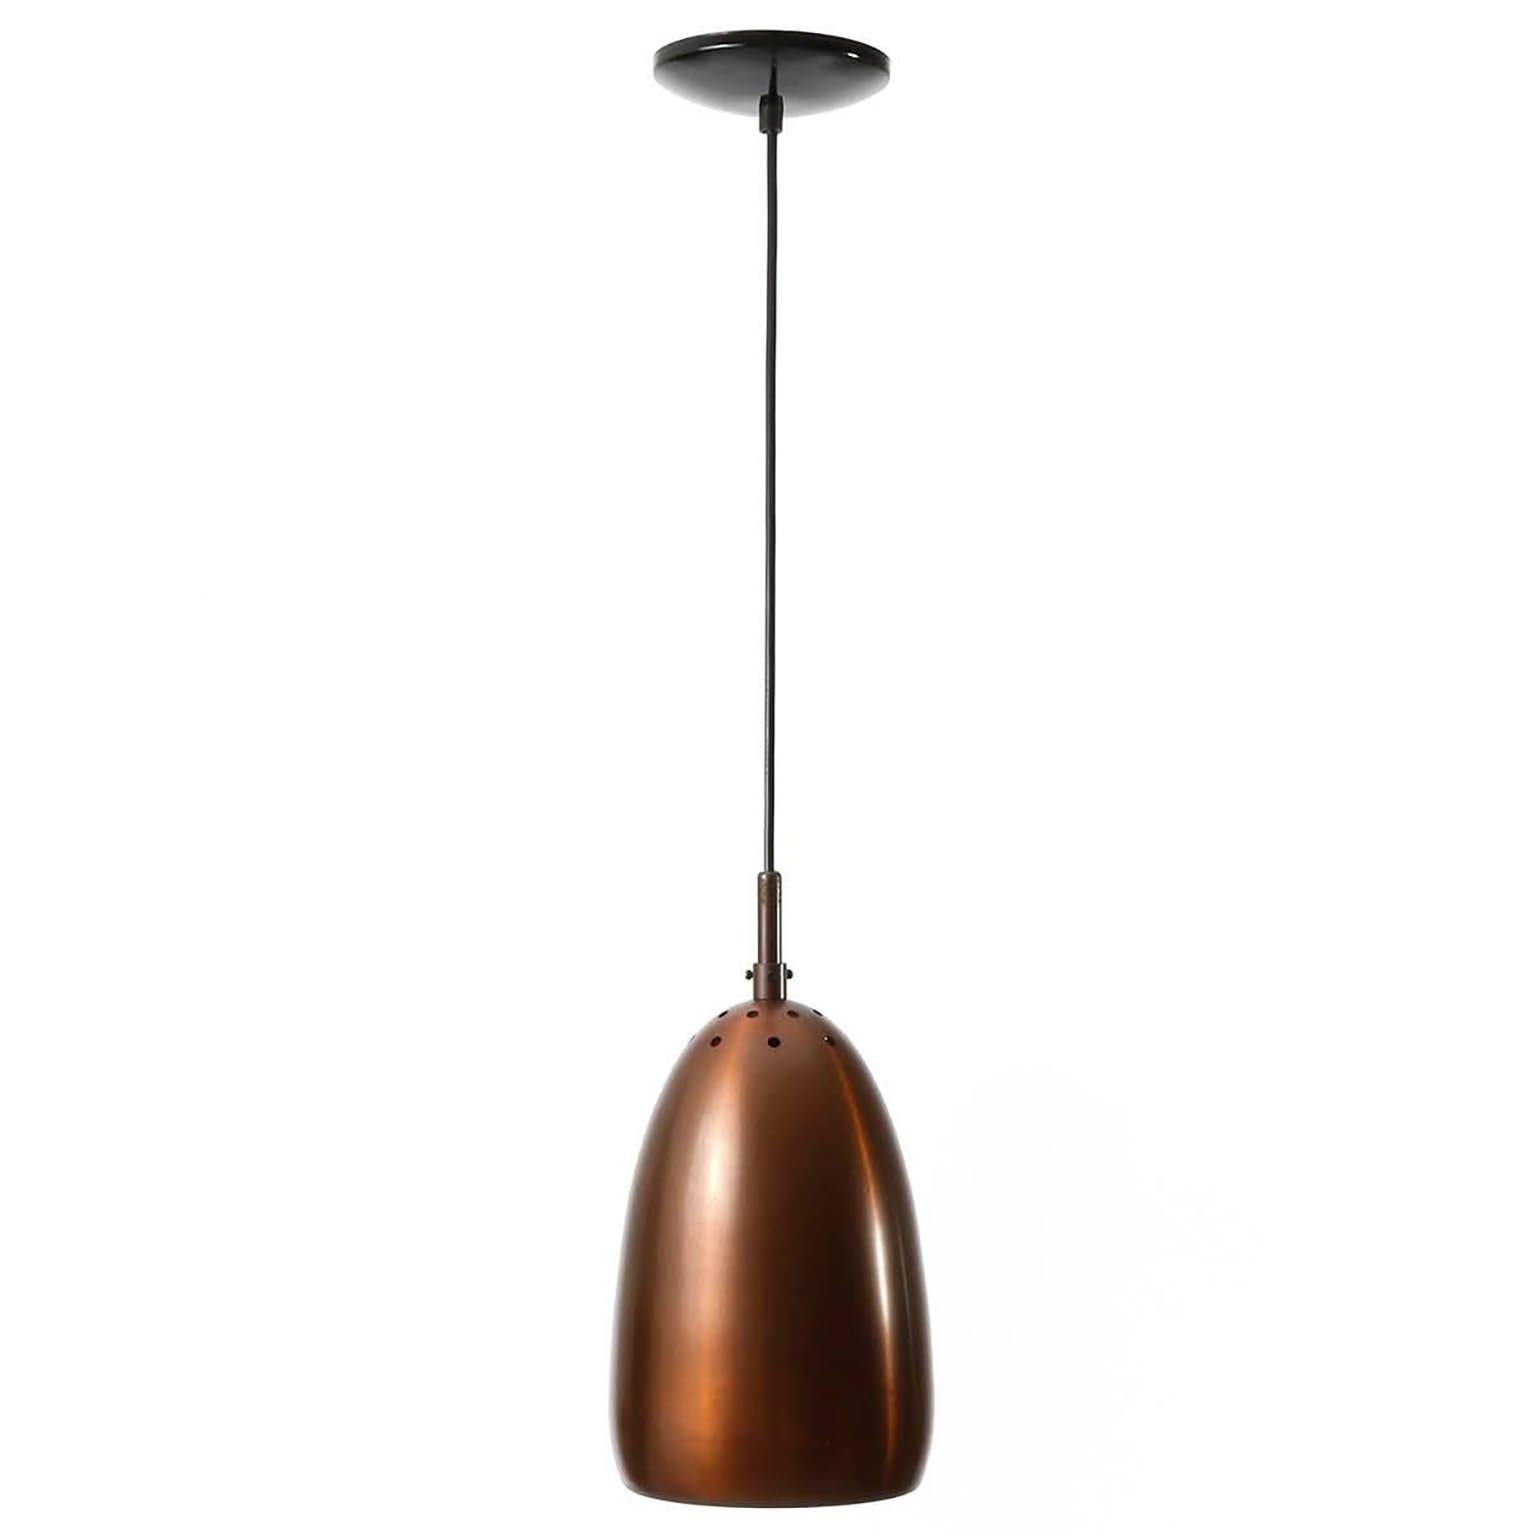 A set of three pendants with wonderful warm natural aged patina made of massive copper.
Very likely manufactured in Italy in midcentury, circa 1960 (late 1950s or early 1960s).
Each lamp has one socket for a medium or standard screw base